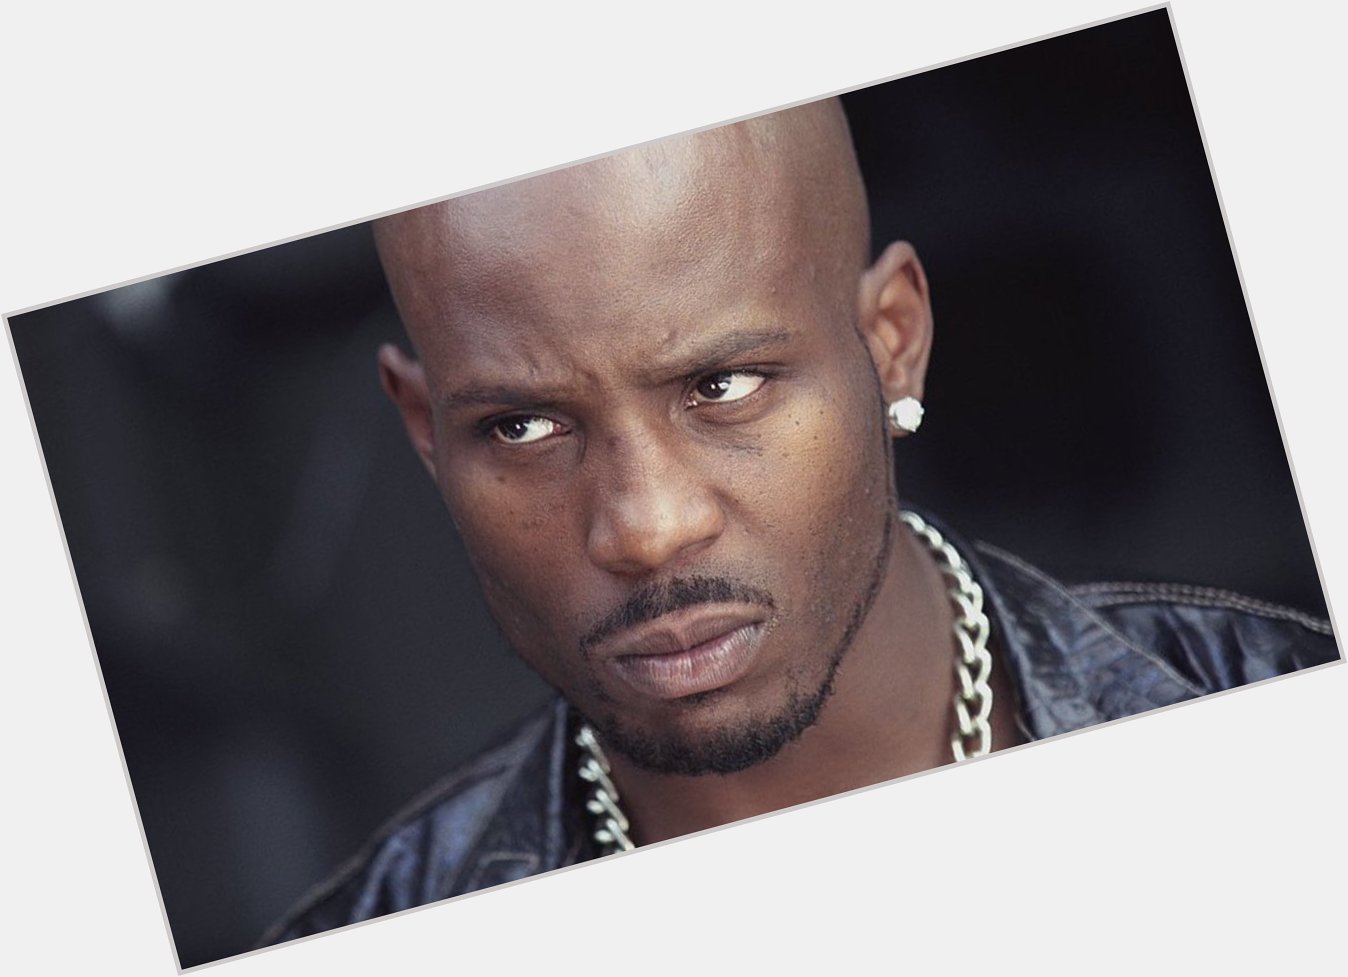 Happy Birthday to one of my favorite rappers ever The Dog, DMX

WHAT!!!!!! 